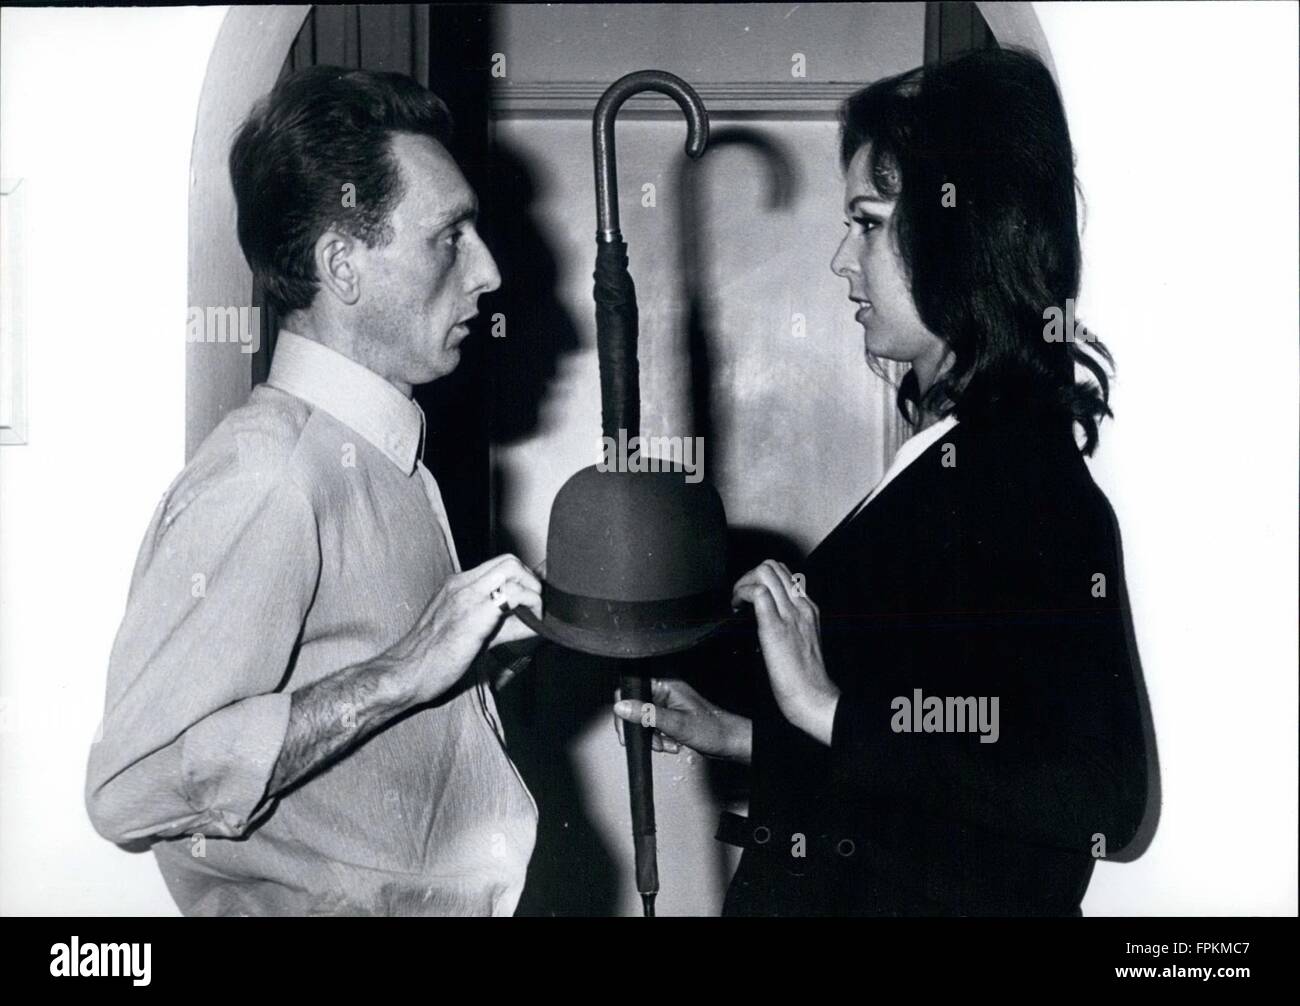 1969 - Heinz Browers is an very good publicity - Manager in Germany. He makes the German ''Emma Peel'' Friedel Frank © Keystone Pictures USA/ZUMAPRESS.com/Alamy Live News Stock Photo